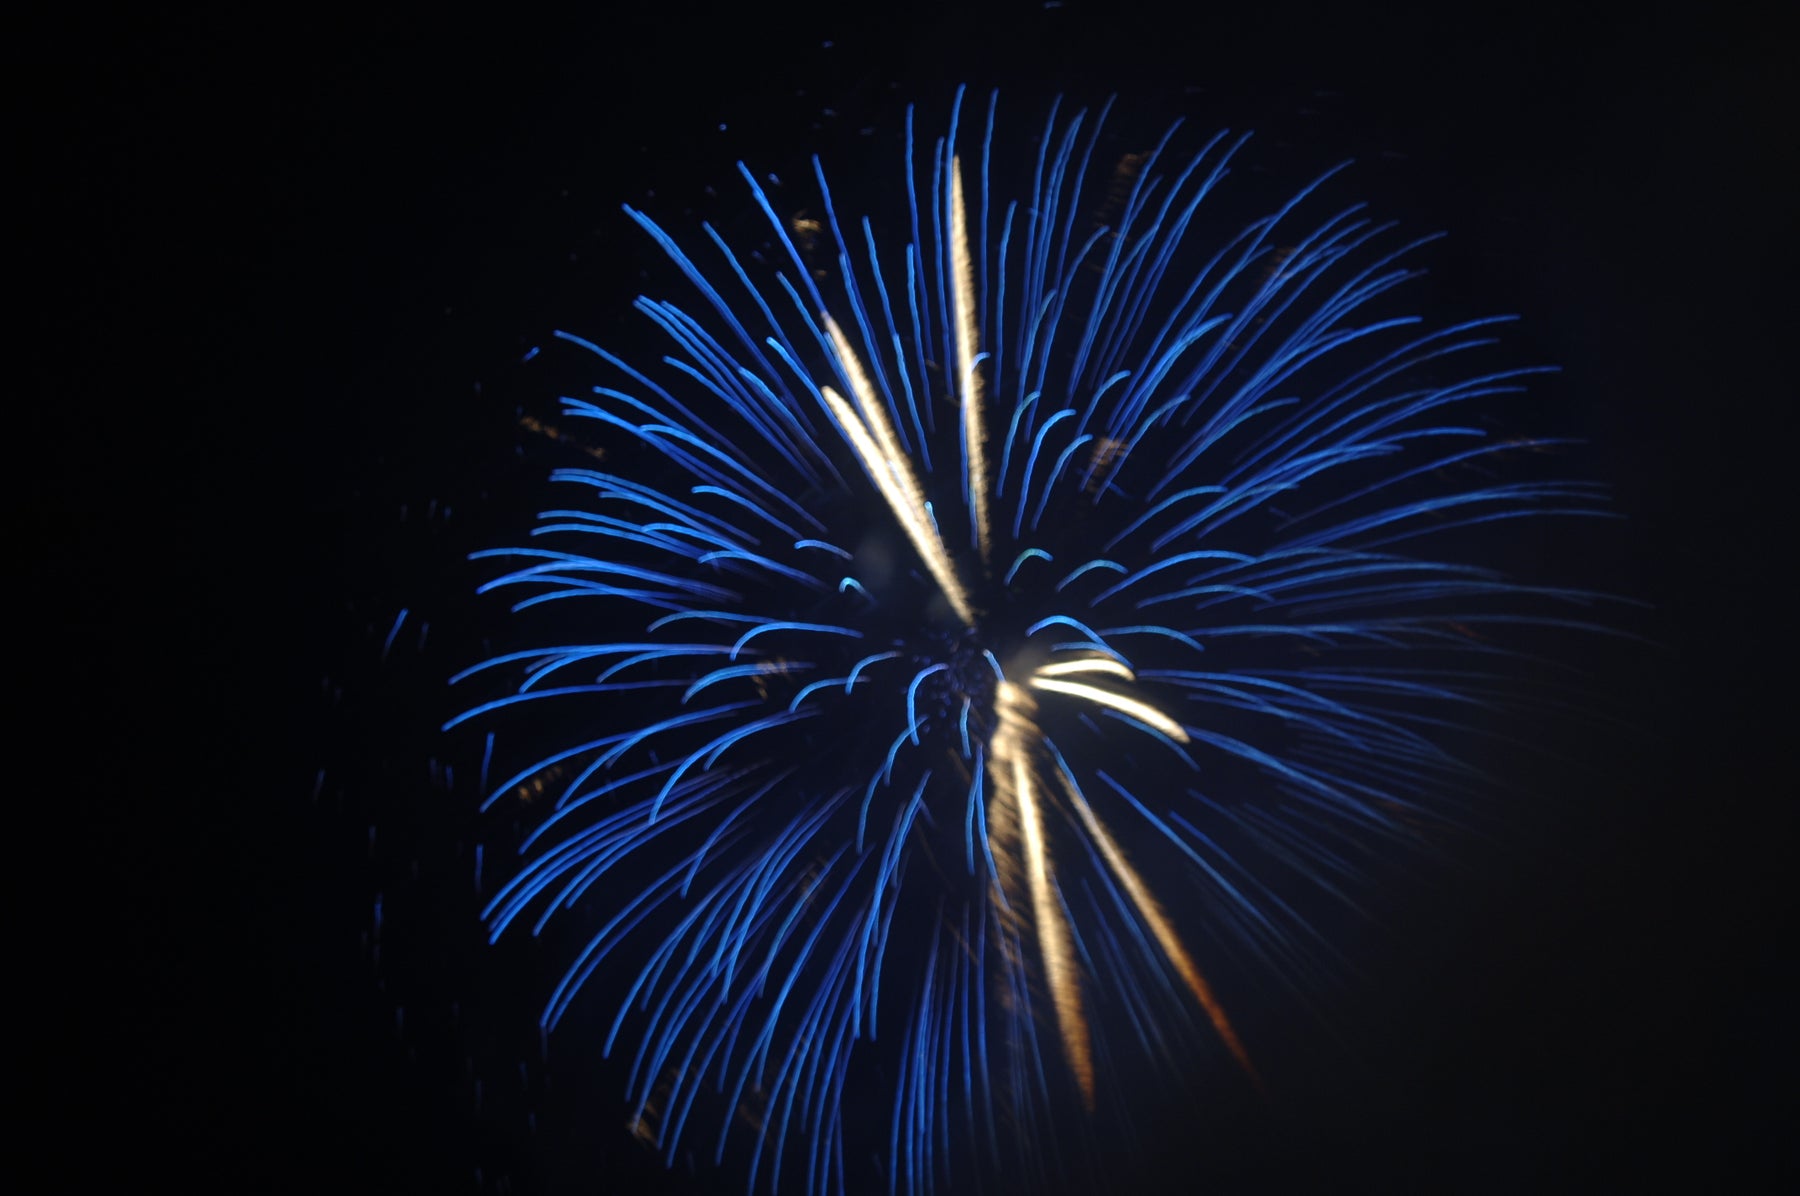 THE ART OF CREATING BLUE COLOURS IN FIREWORKS